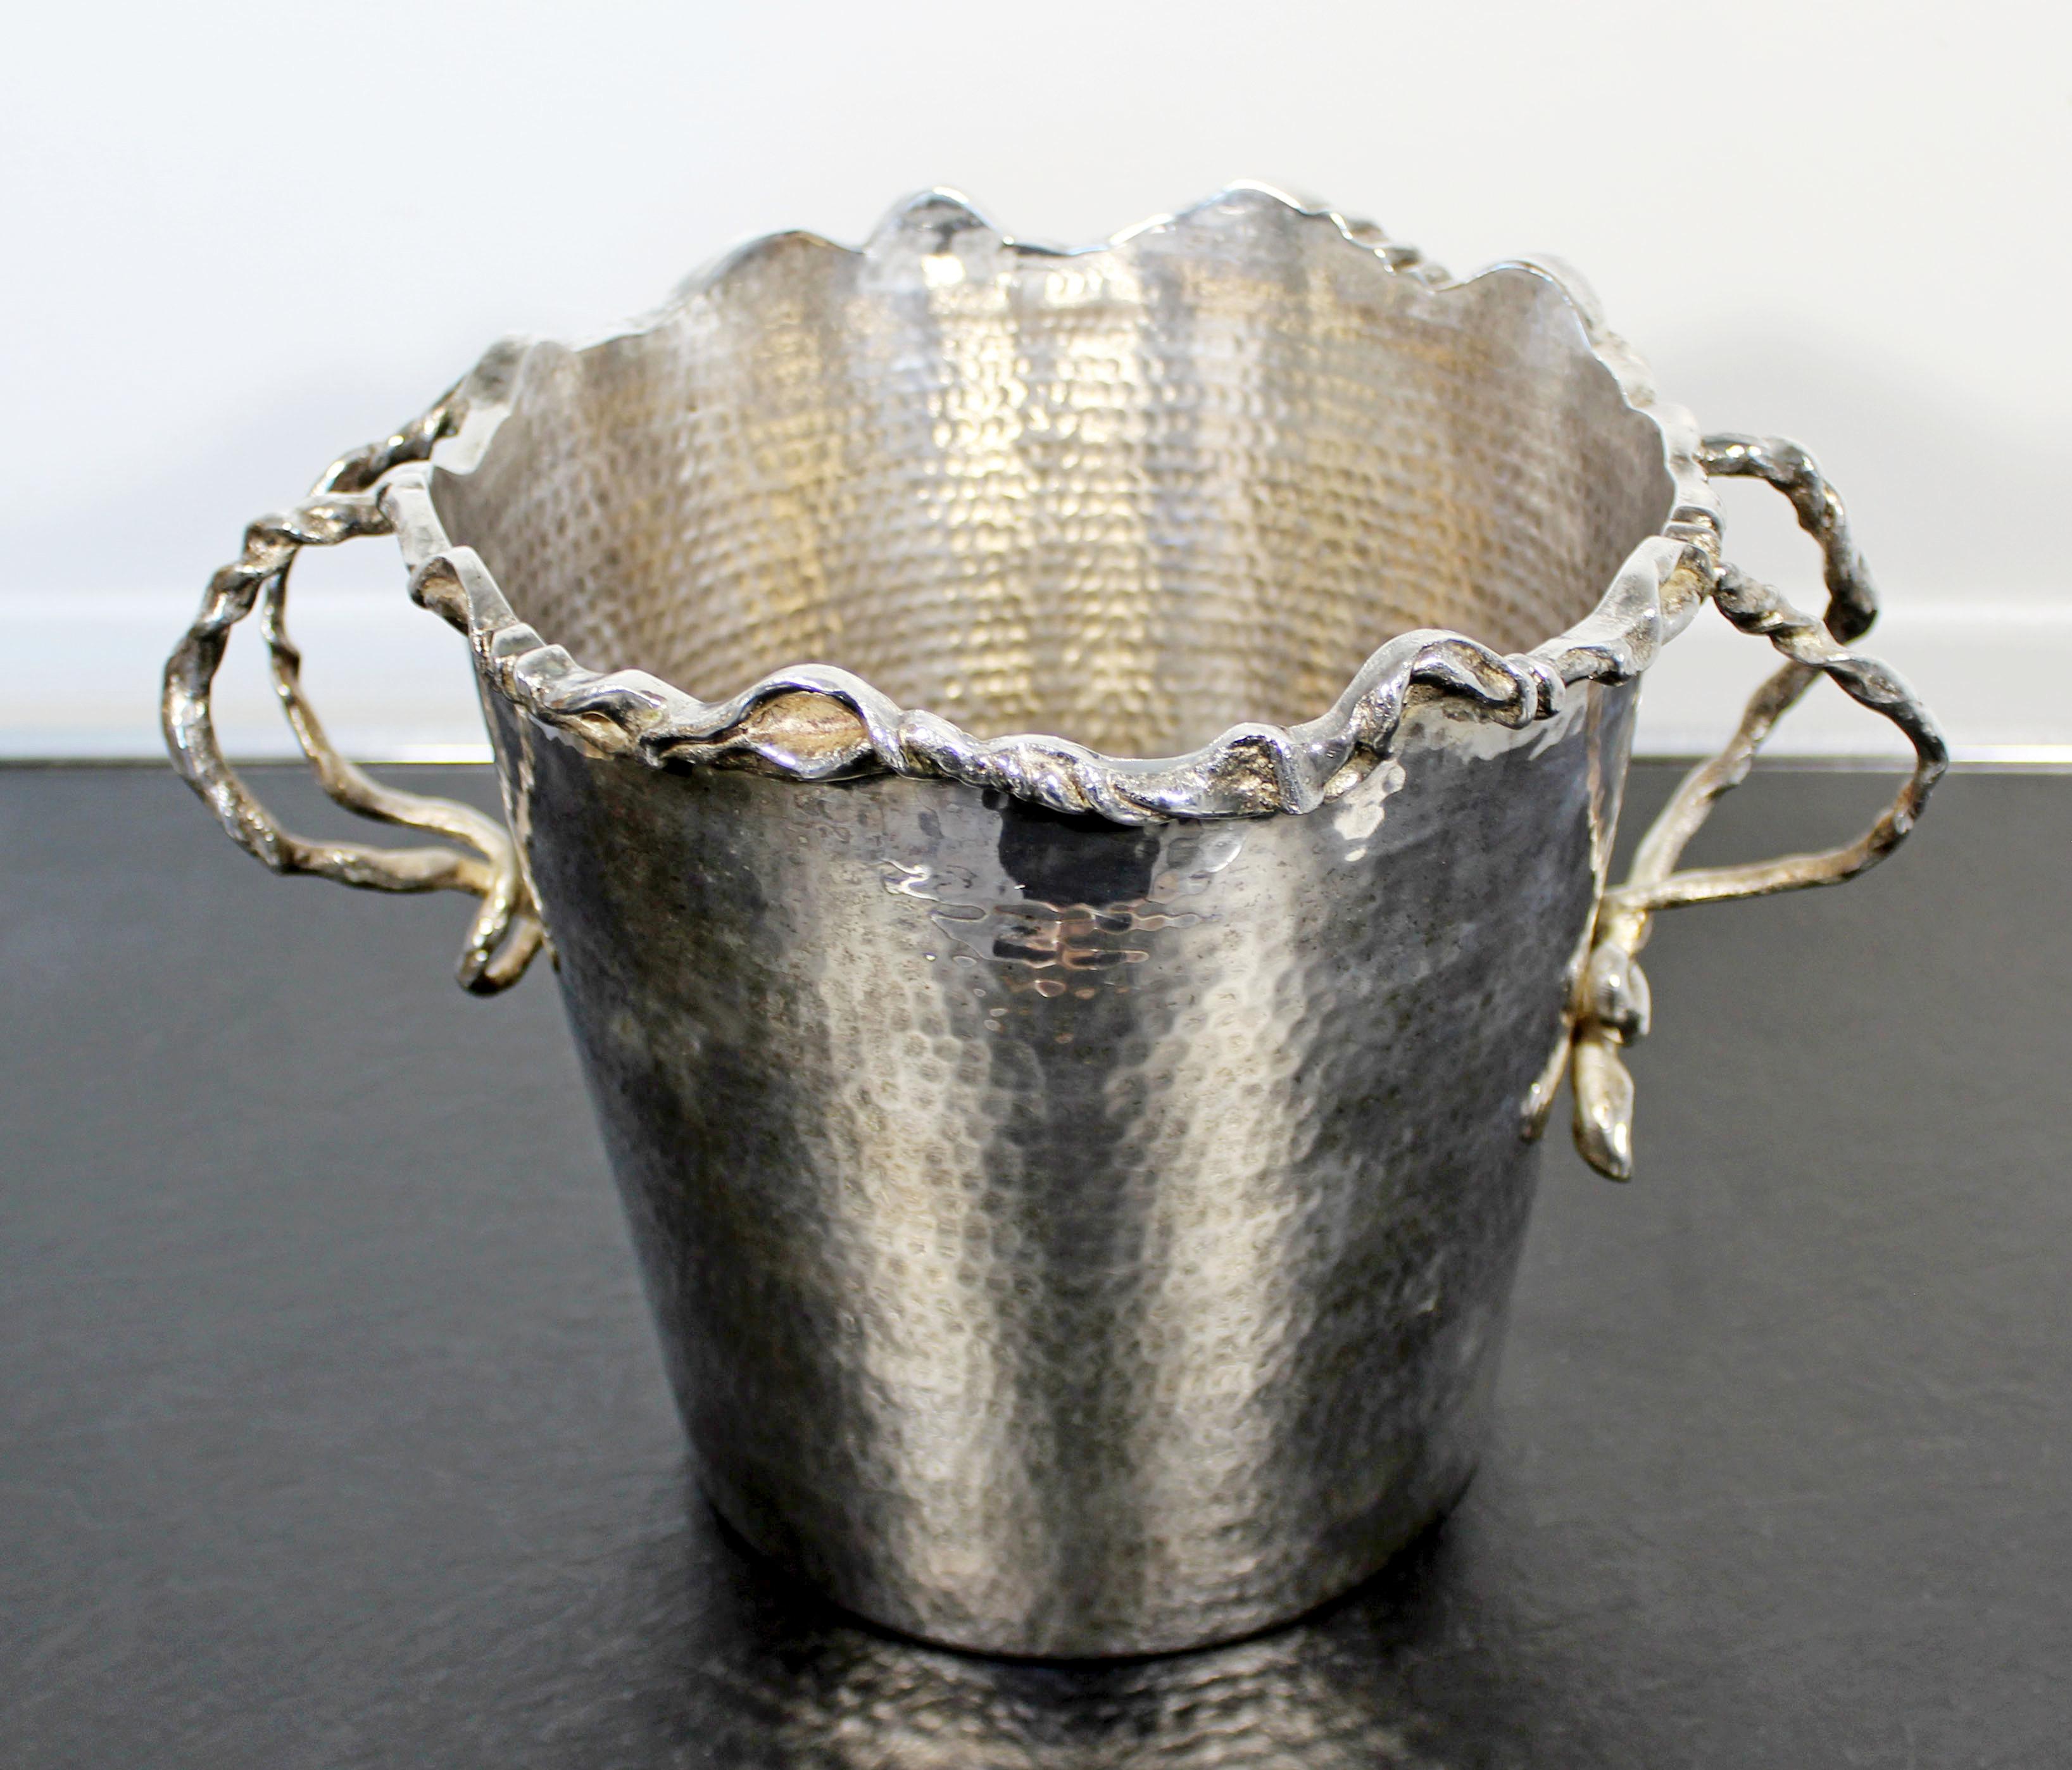 For your consideration is a marvelous, silver plated champagne or ice bucket, with handles, by Michael Aram, circa 1970s-1980s. In excellent condition. The dimensions are 11.5